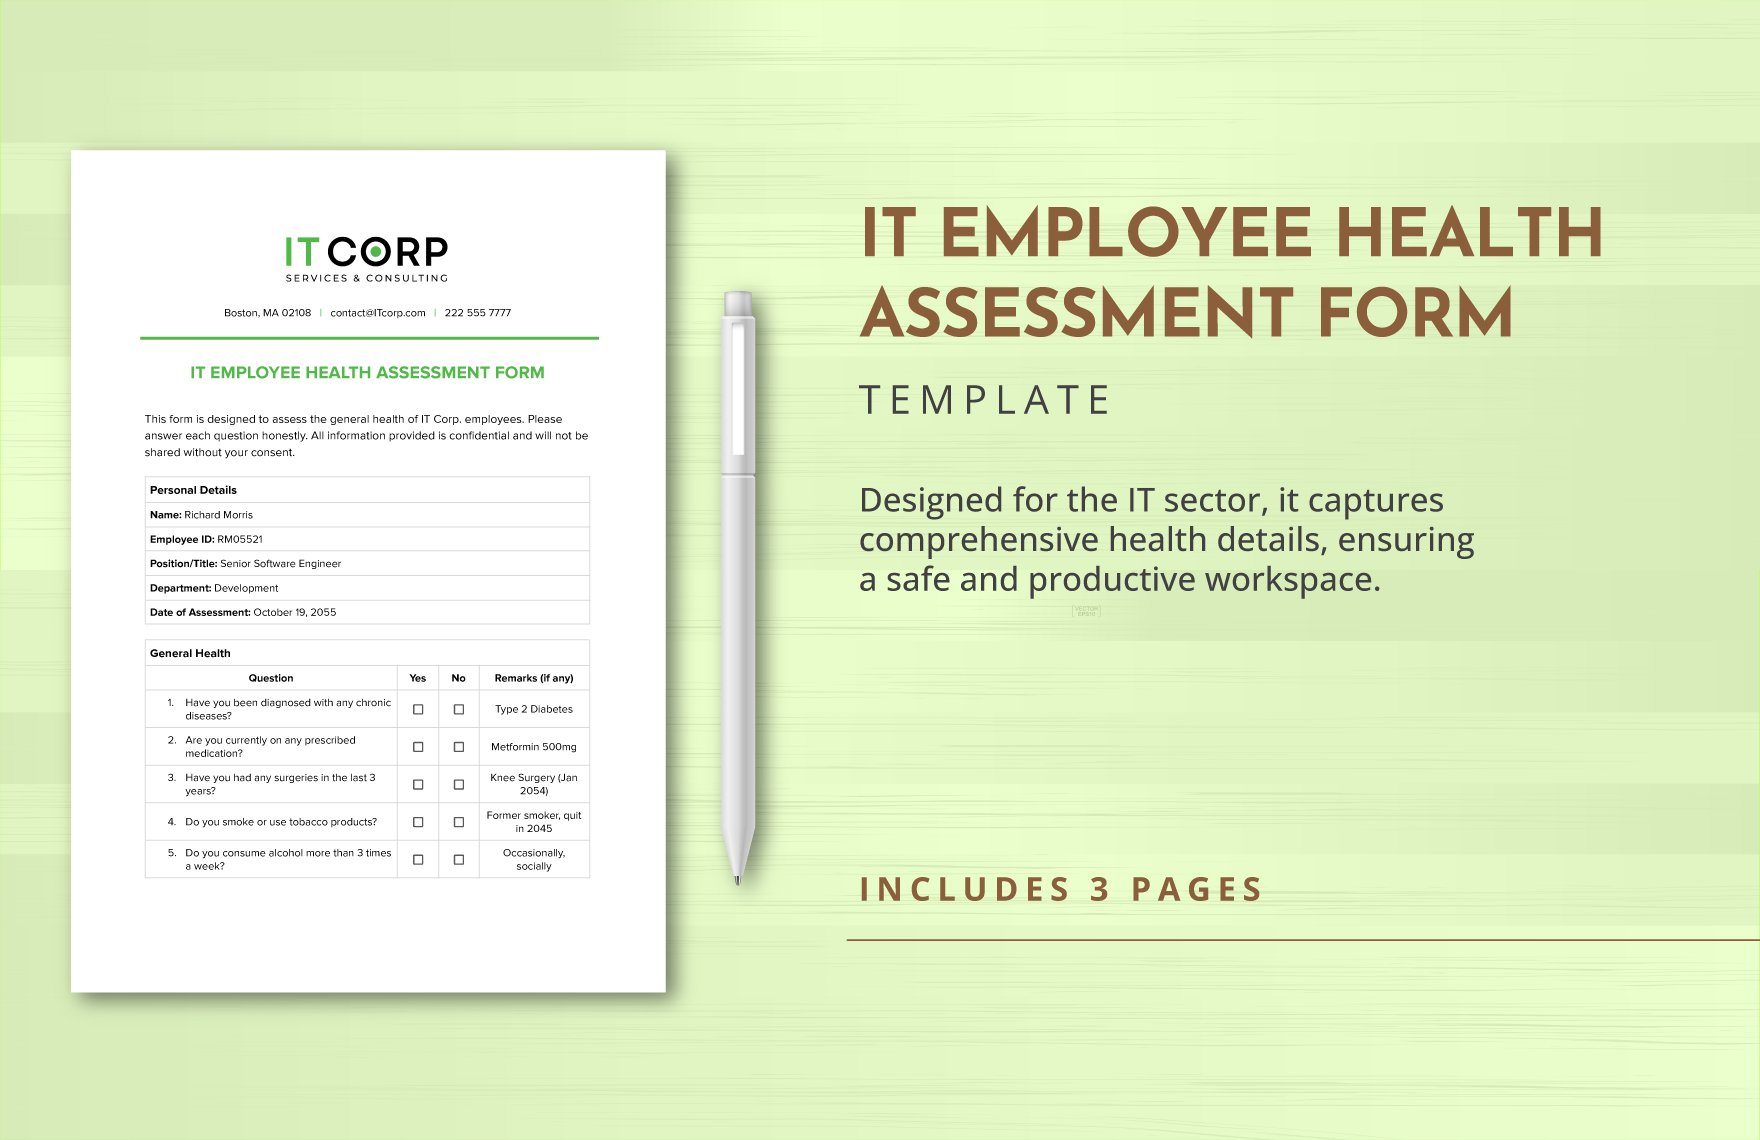 IT Employee Health Assessment Form Template in Word, Google Docs, PDF